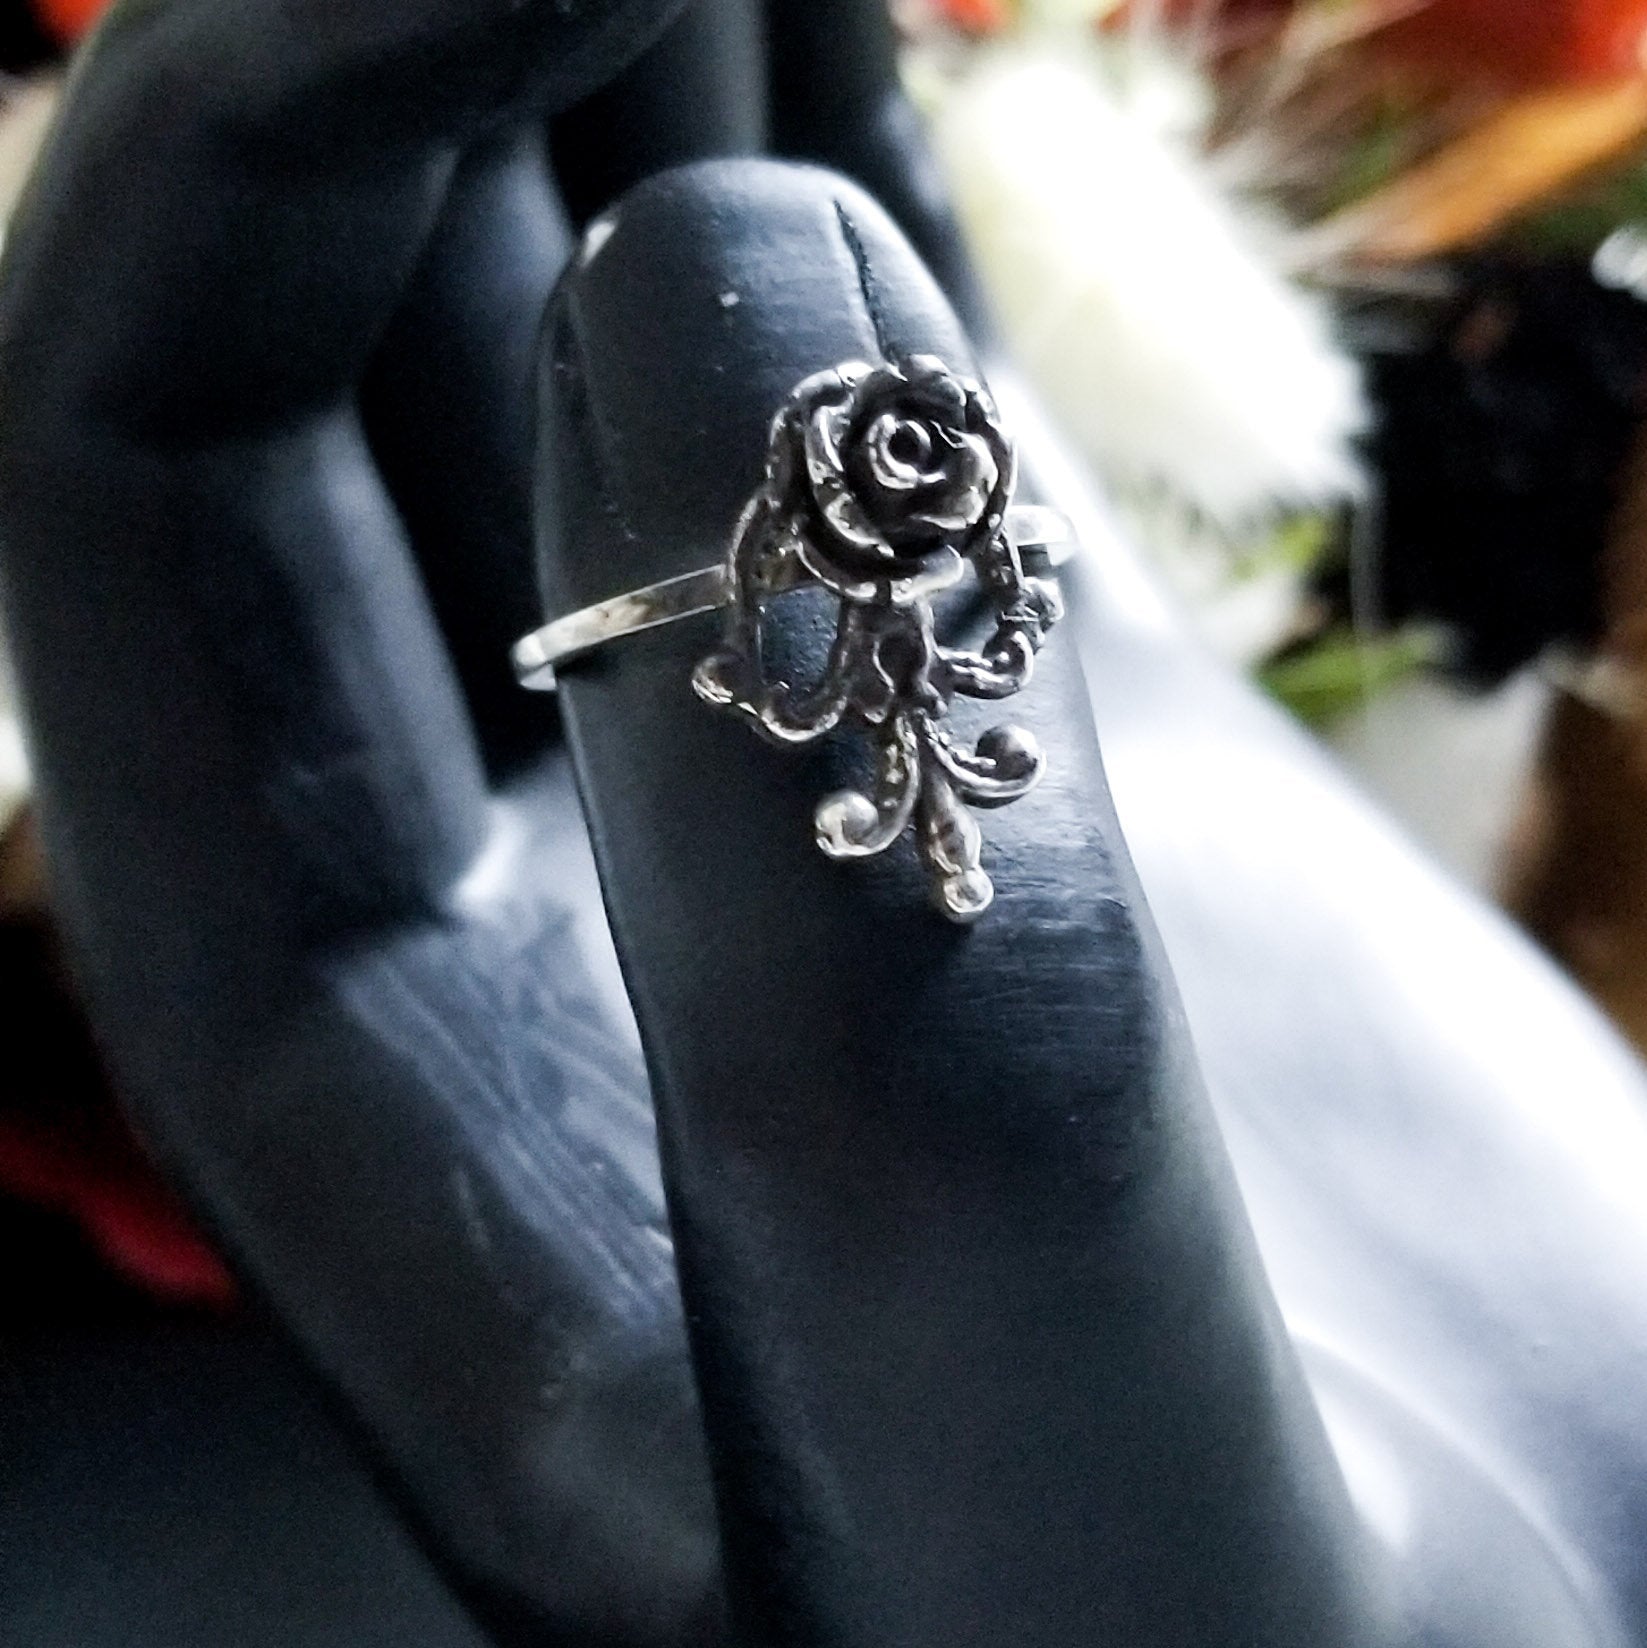 Victorian Rose and Lace Ring-Ring-Inchoo Bijoux-Inchoo Bijoux